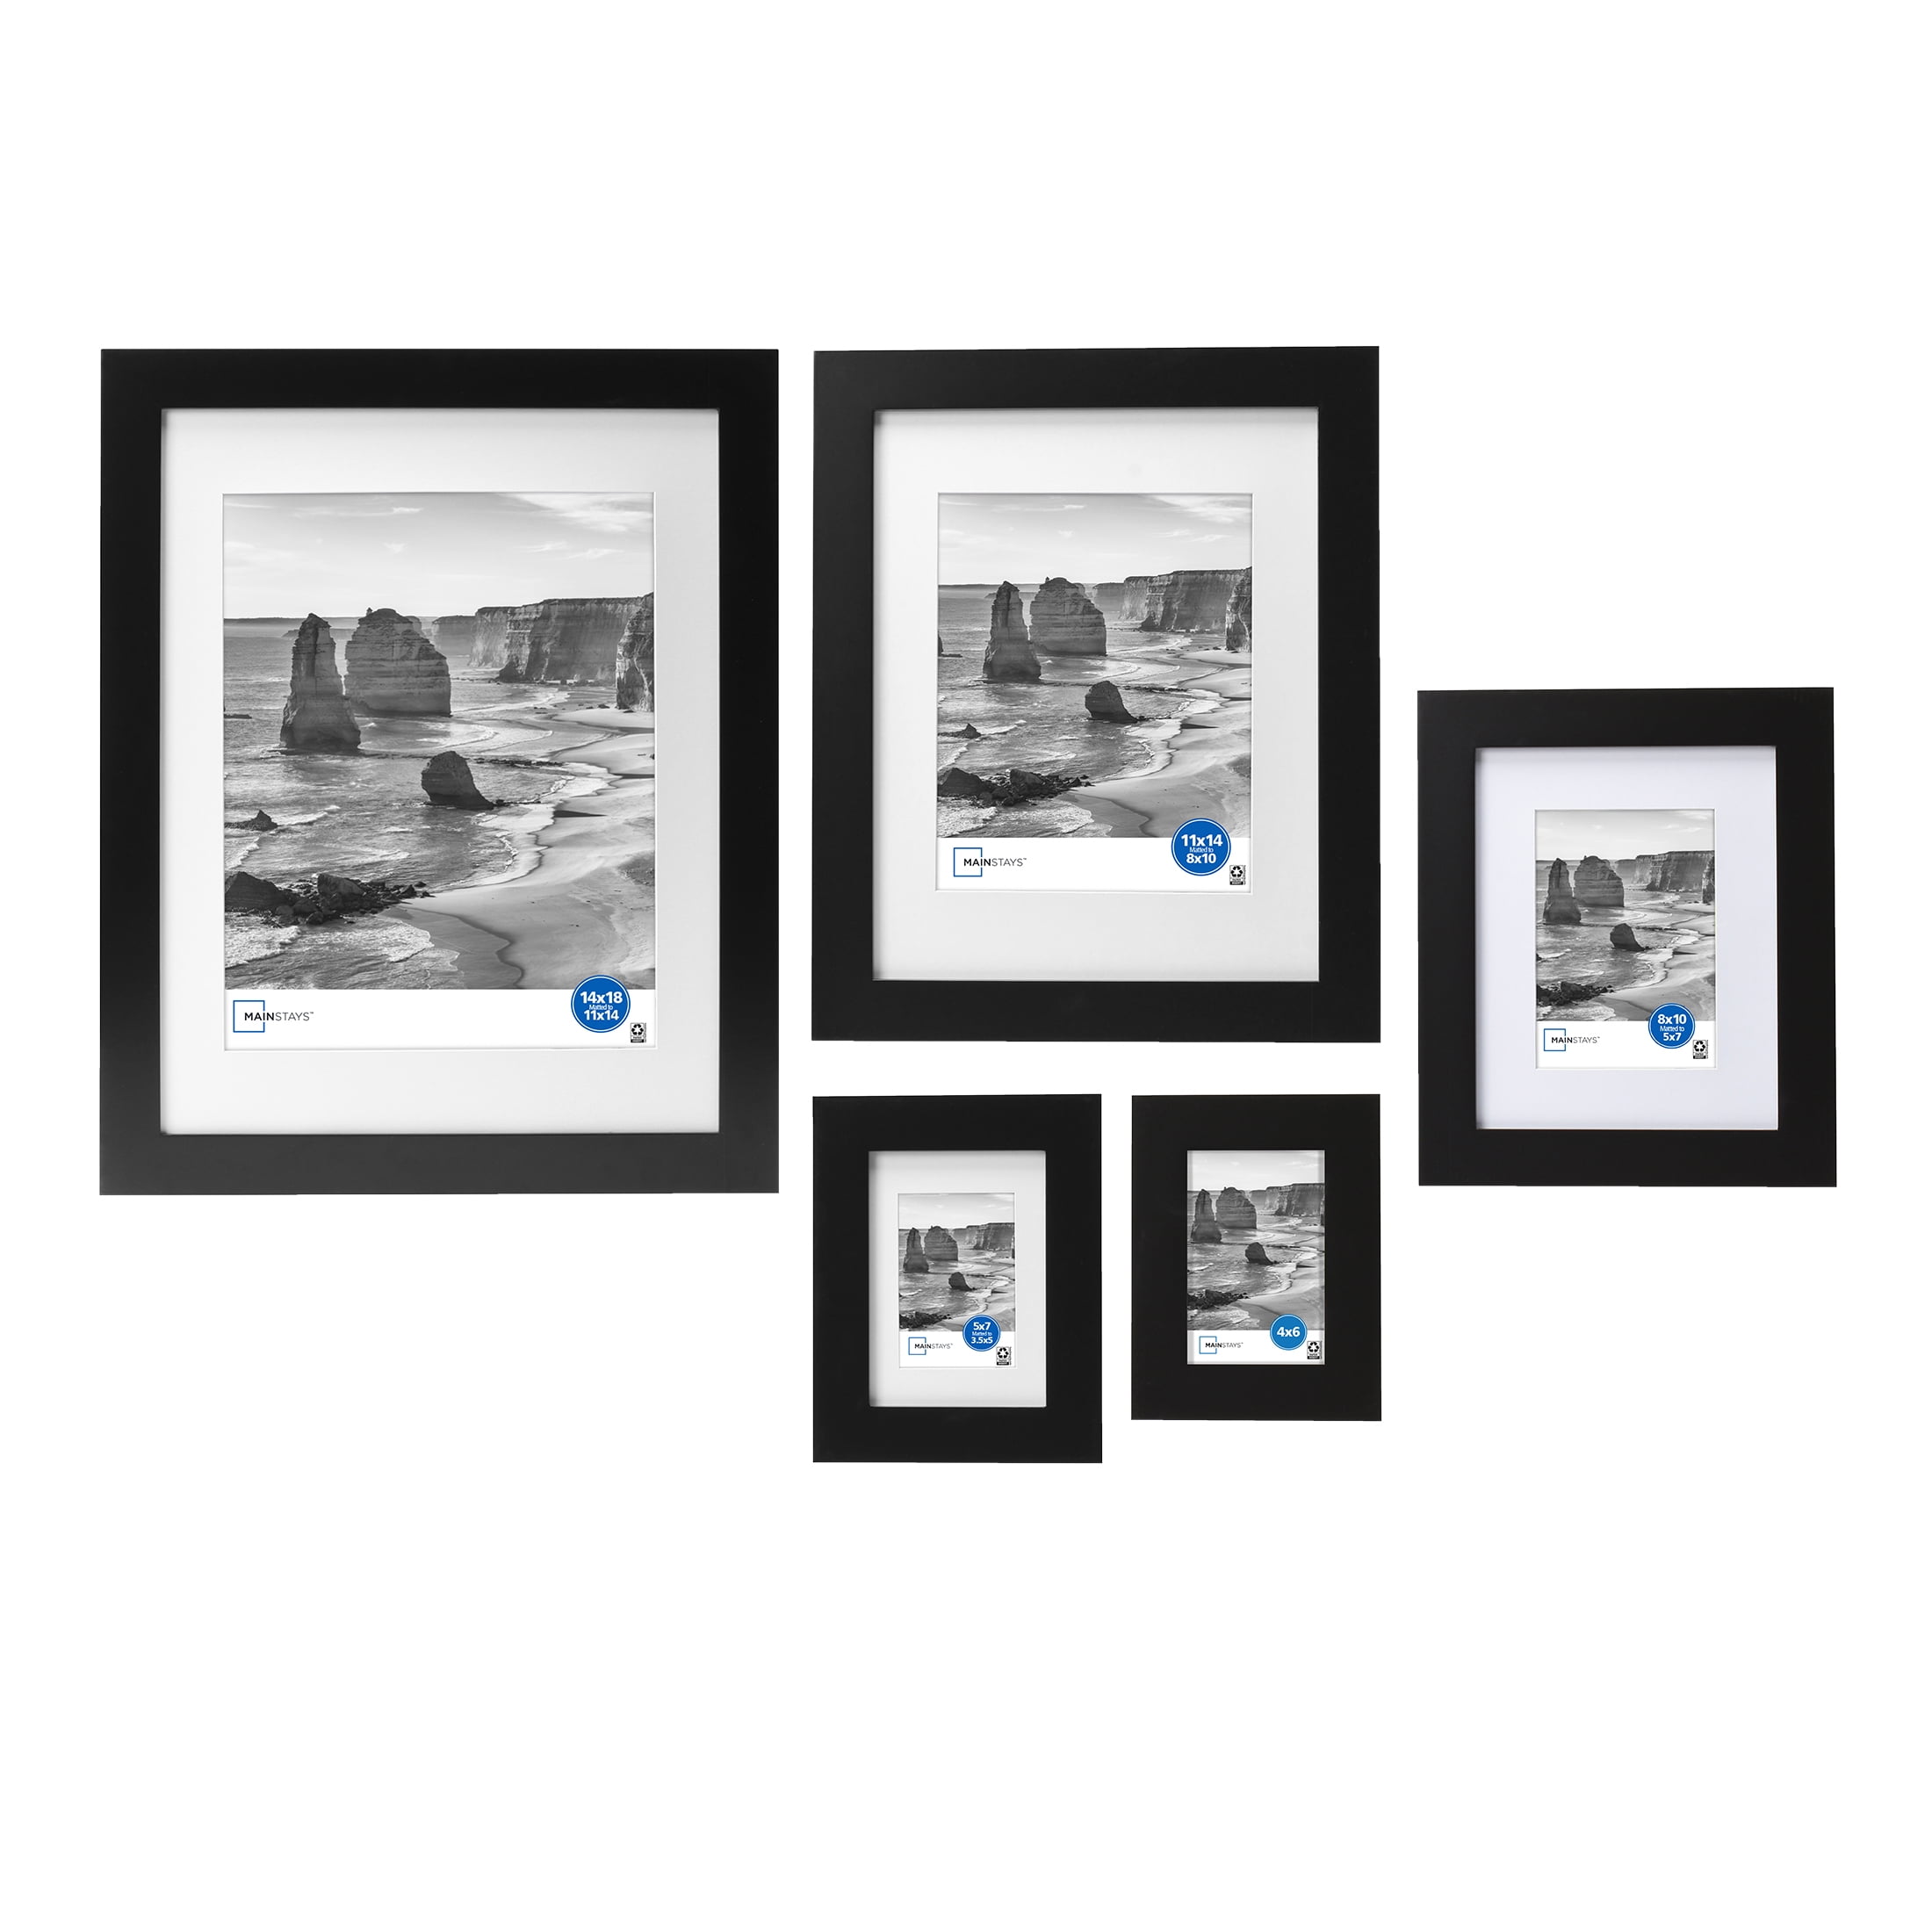 Mainstays 5x7 Matted to 3.5x5 Flat Wide Black Gallery Wall Picture Frame -  Walmart.com